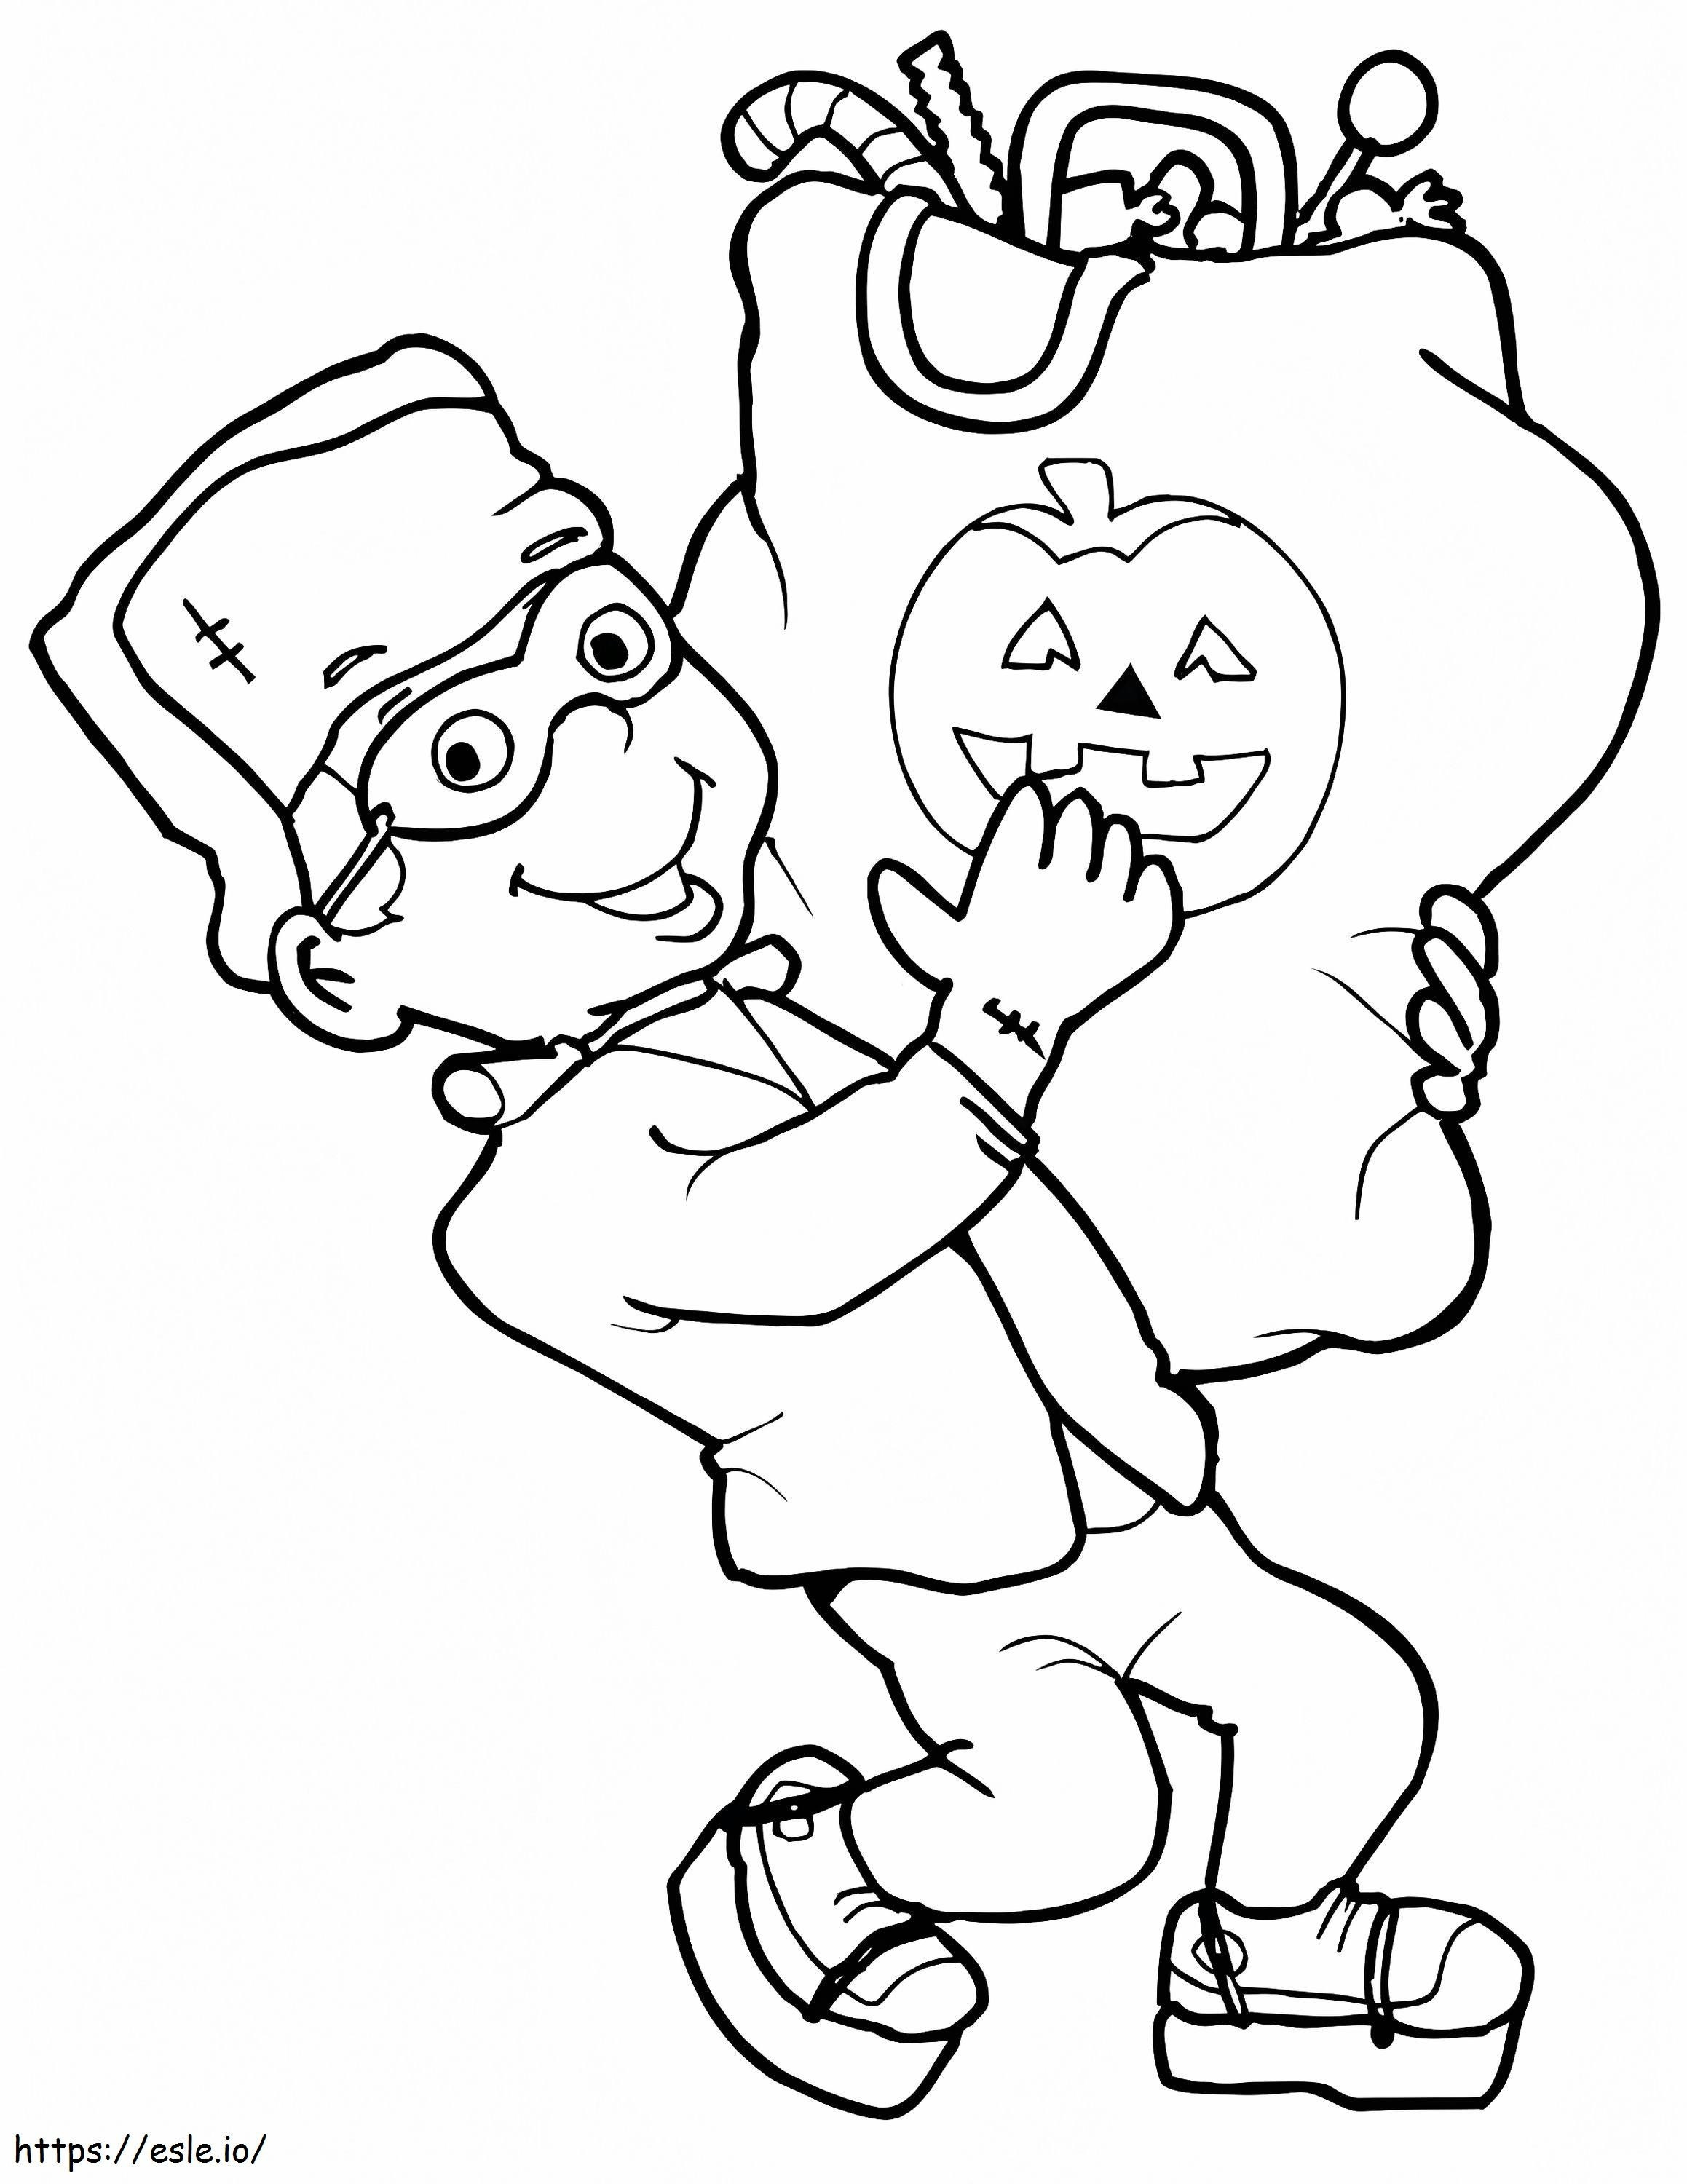 Frankenstein Coloring Sheet Little With Bag Full Of Candy In Little Cartoon Halloween Frankenstein Printable coloring page